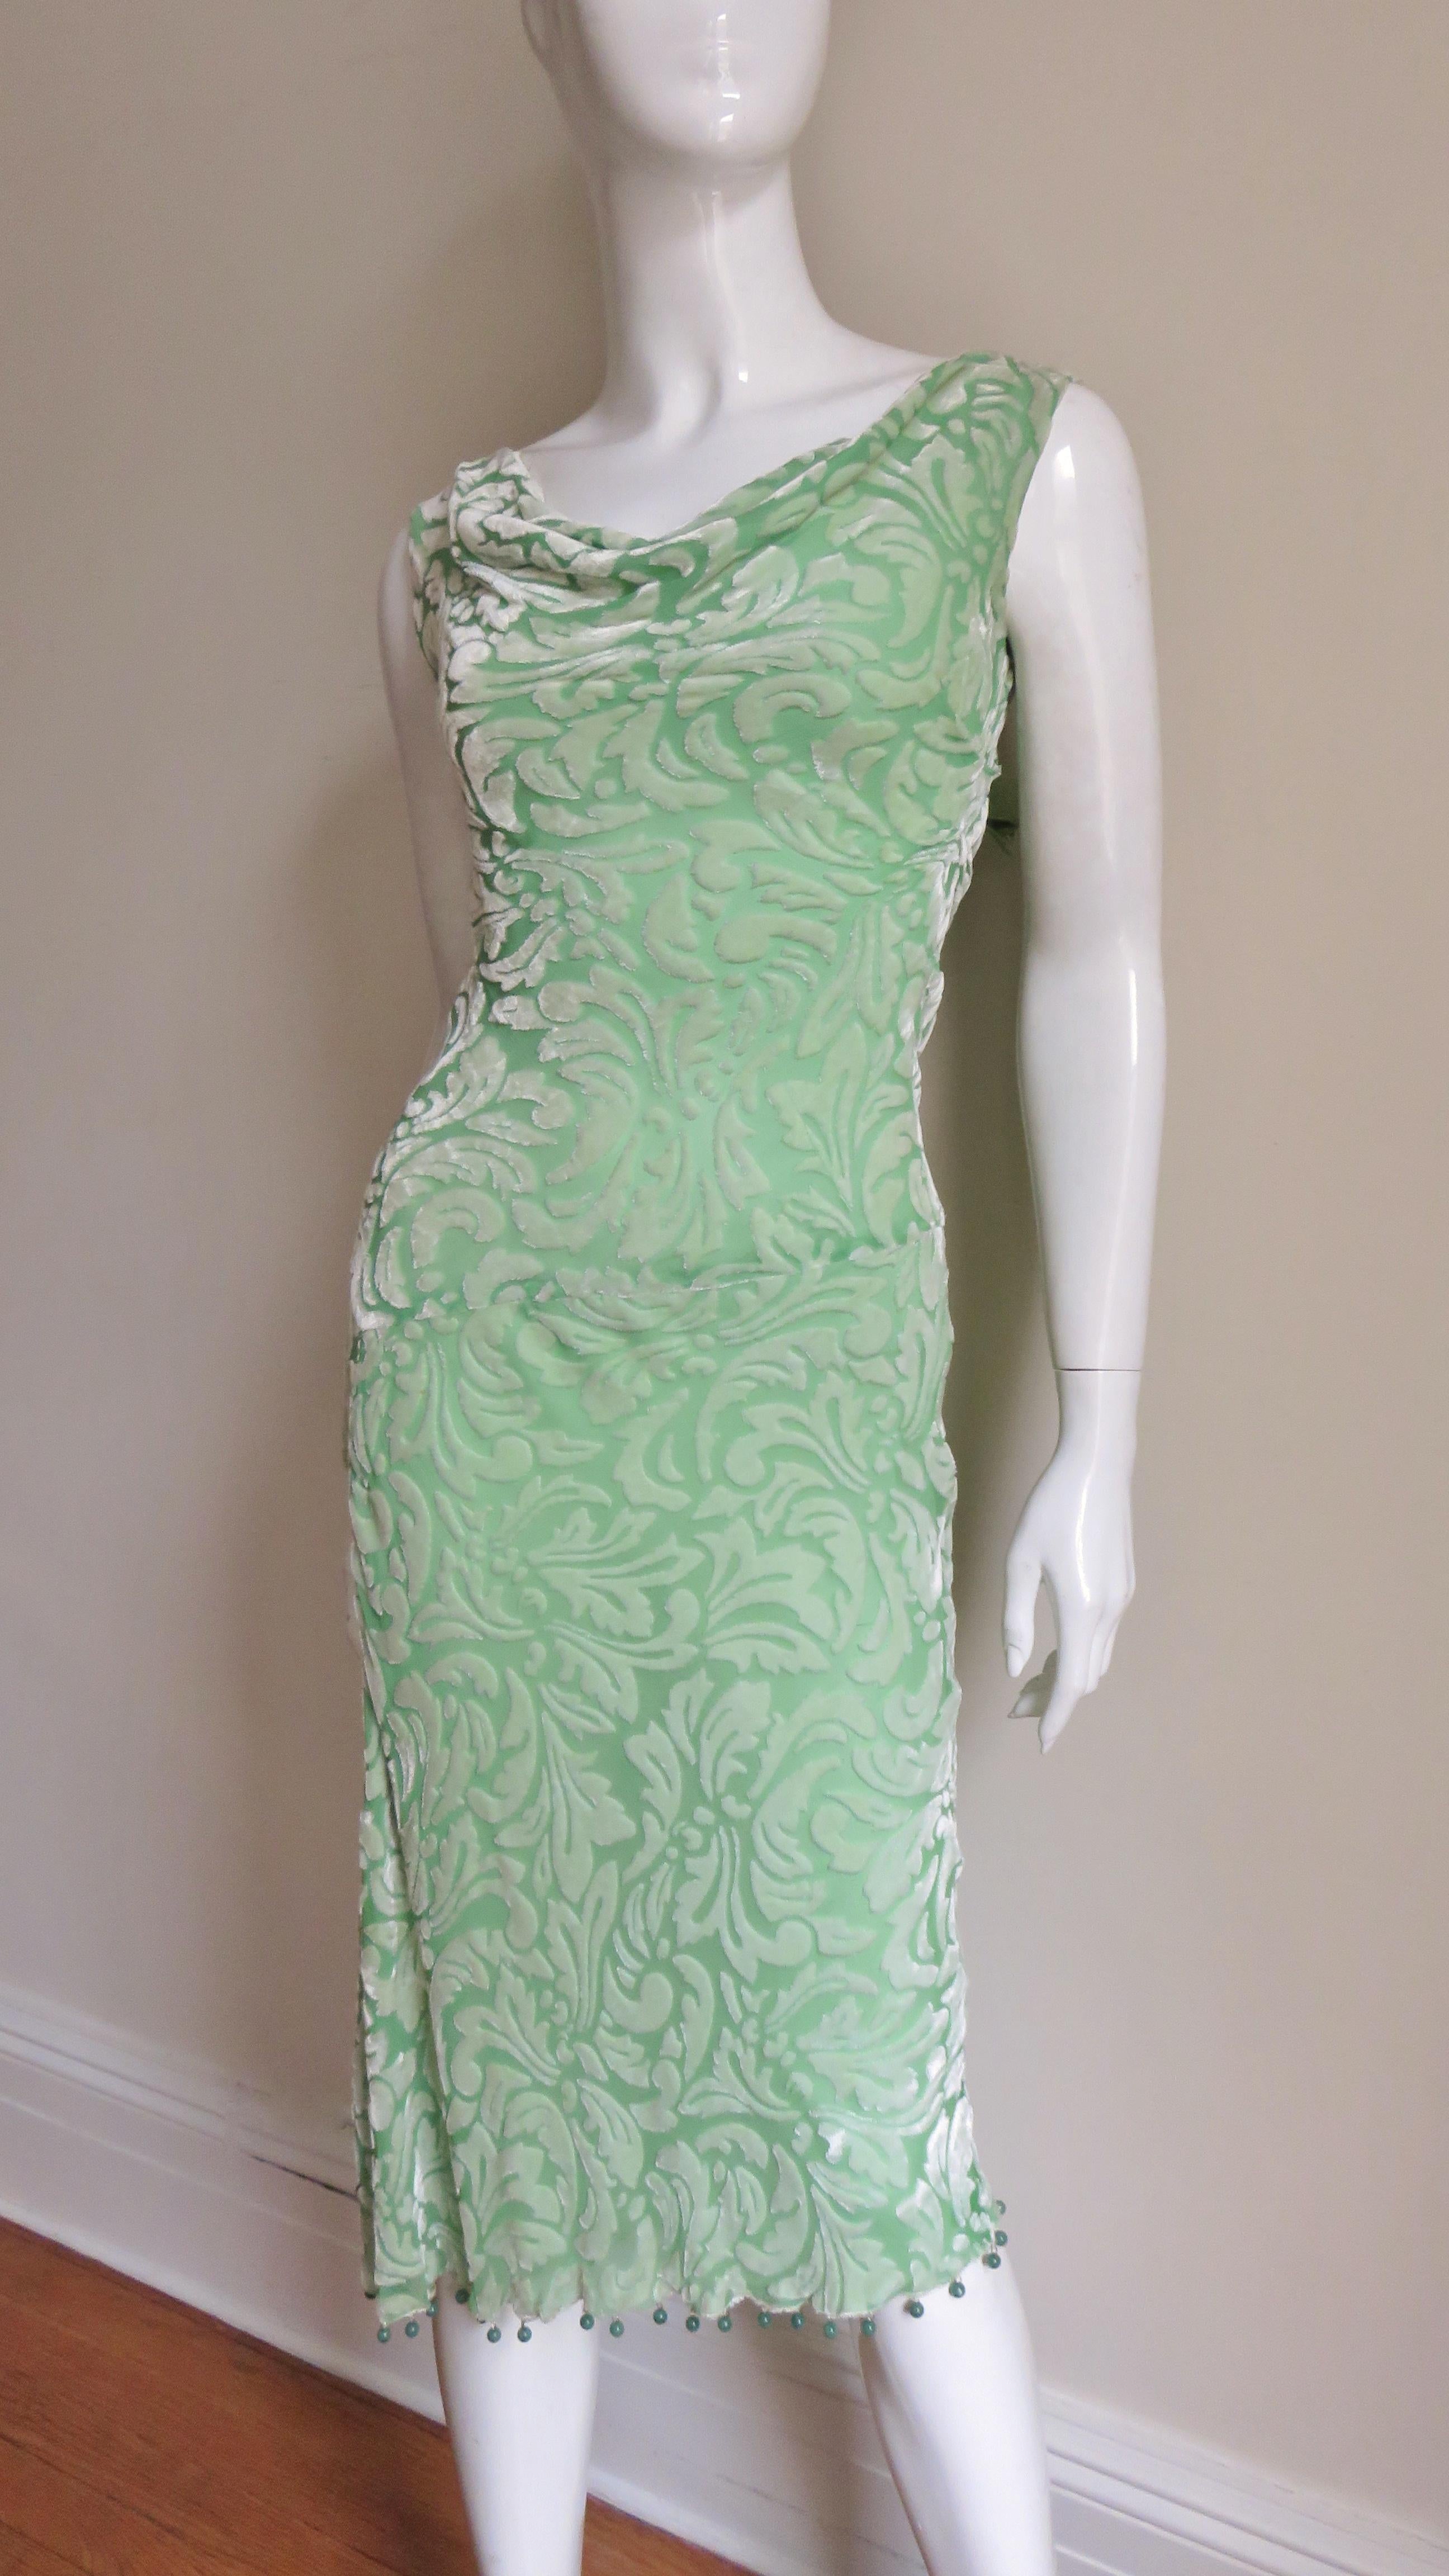 A fabulous light green silk cut velvet dress from Gianni Versace in a pattern of abstract scrolls, feathers and leaves.  Cut on the bias for a great fit it has a scoop neckline front and back. The skirt portion gently flares to the hem and has a 12